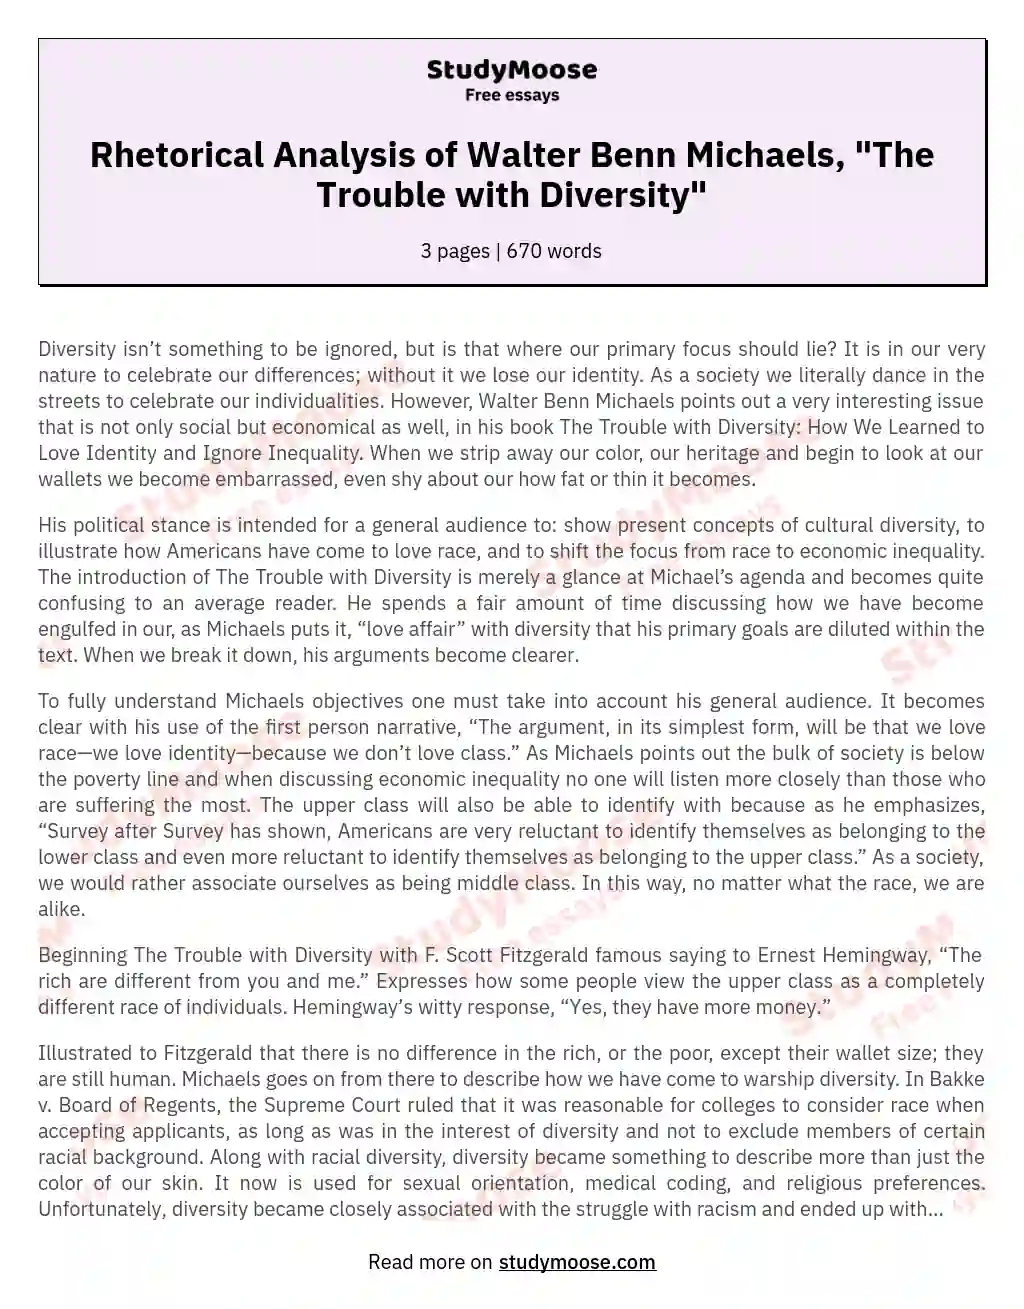 Rhetorical Analysis of Walter Benn Michaels, "The Trouble with Diversity"